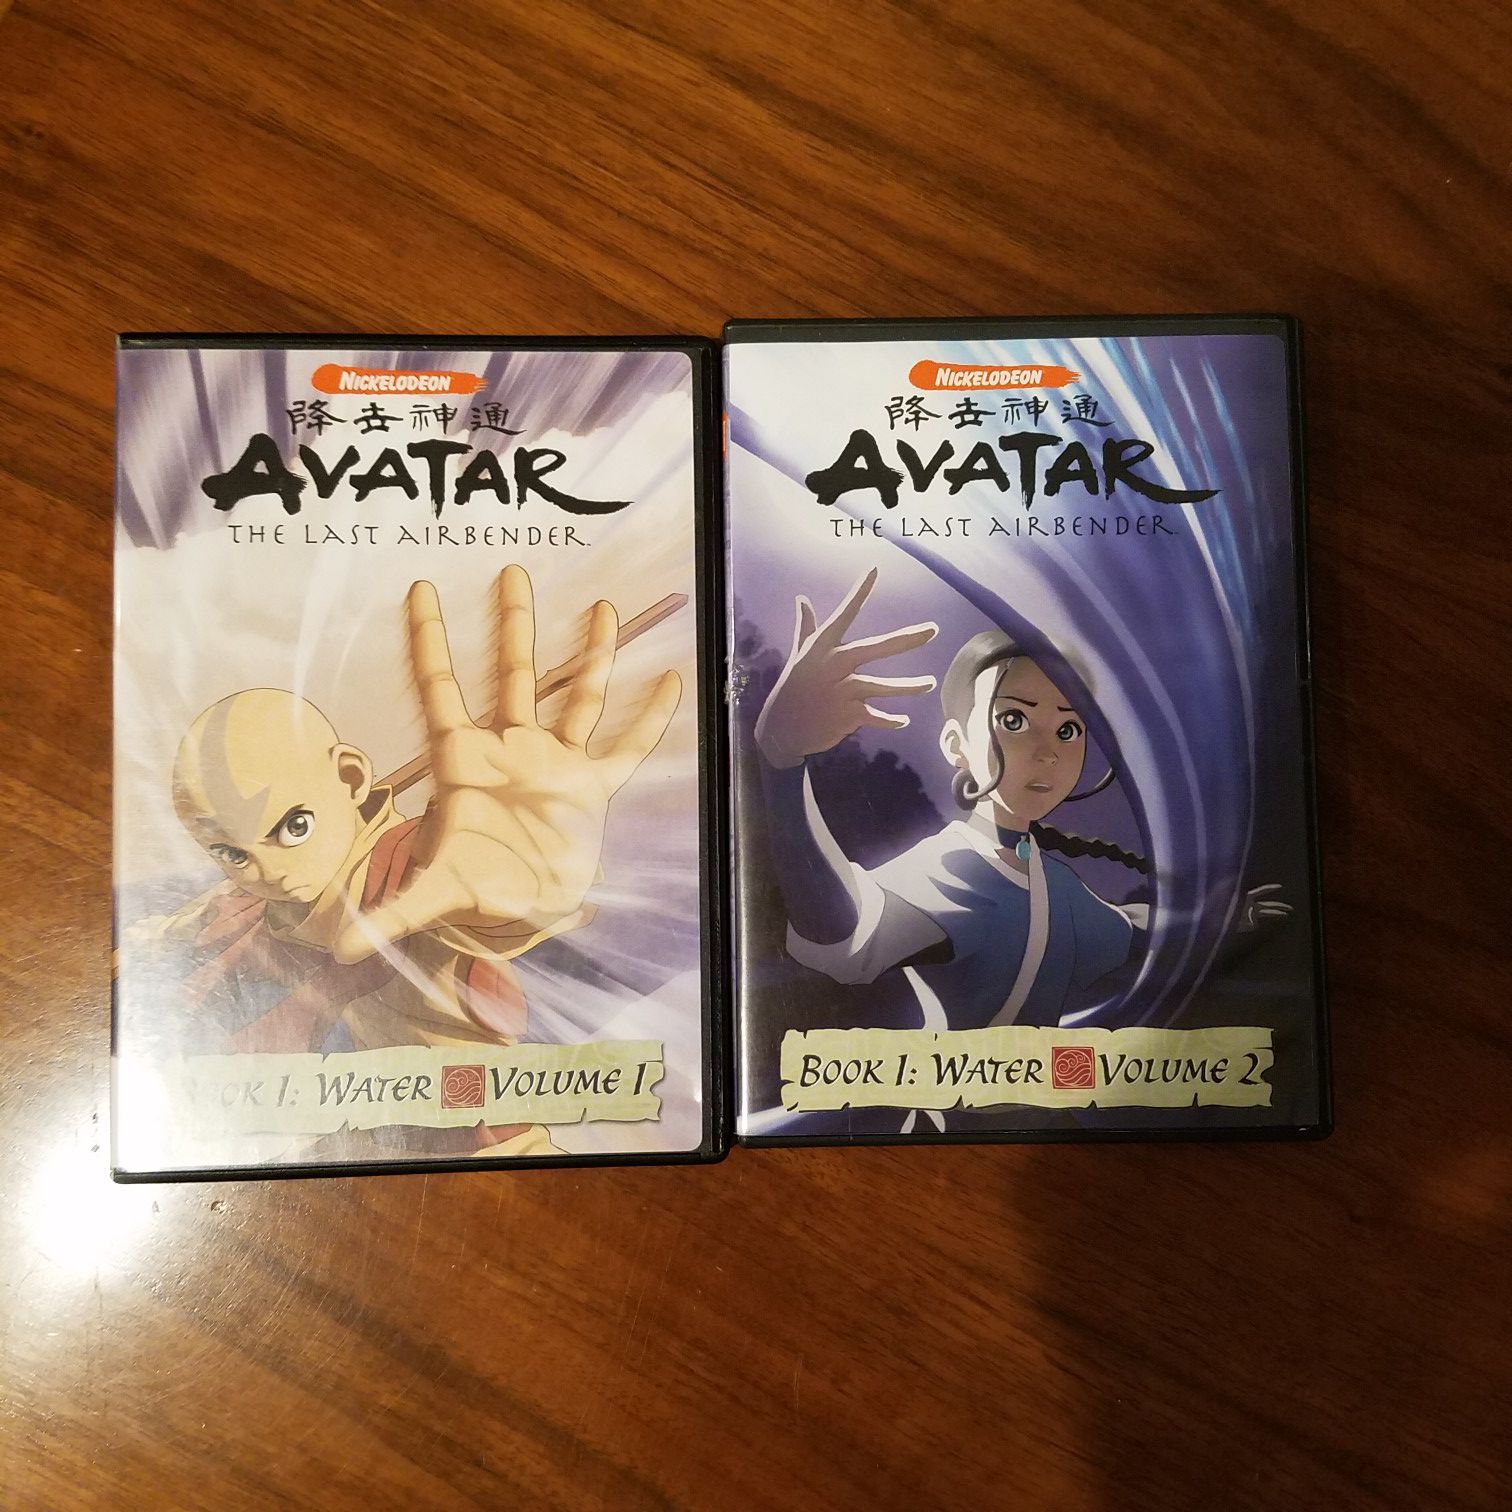 Avatar The Last Airbender DVD Book 1 Water Volumes 1 and 2